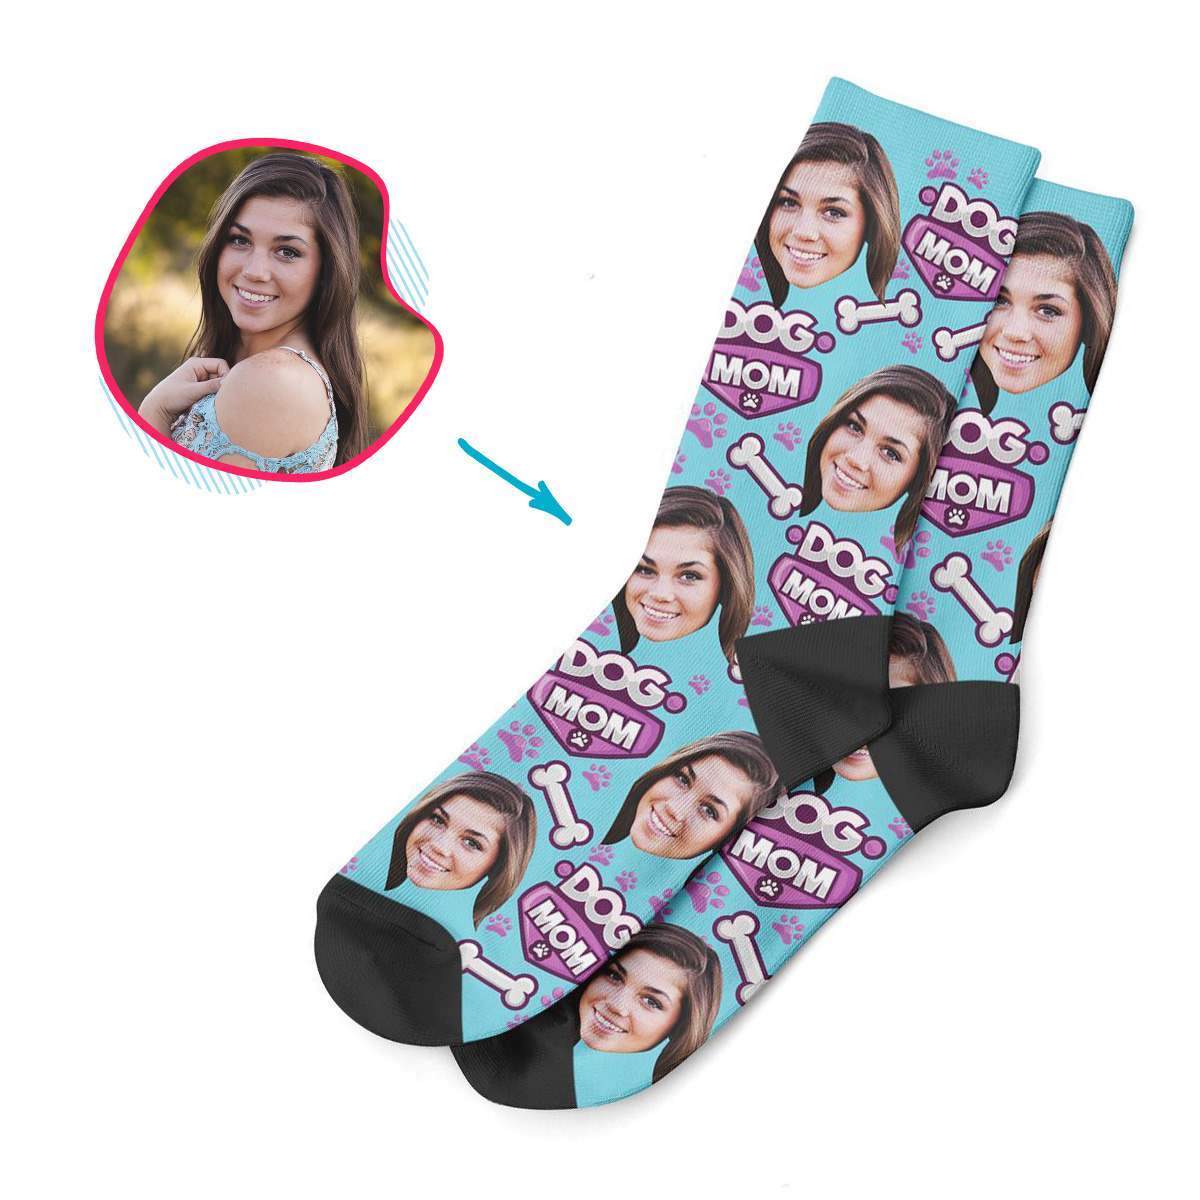 blue Dog Mom socks personalized with photo of face printed on them